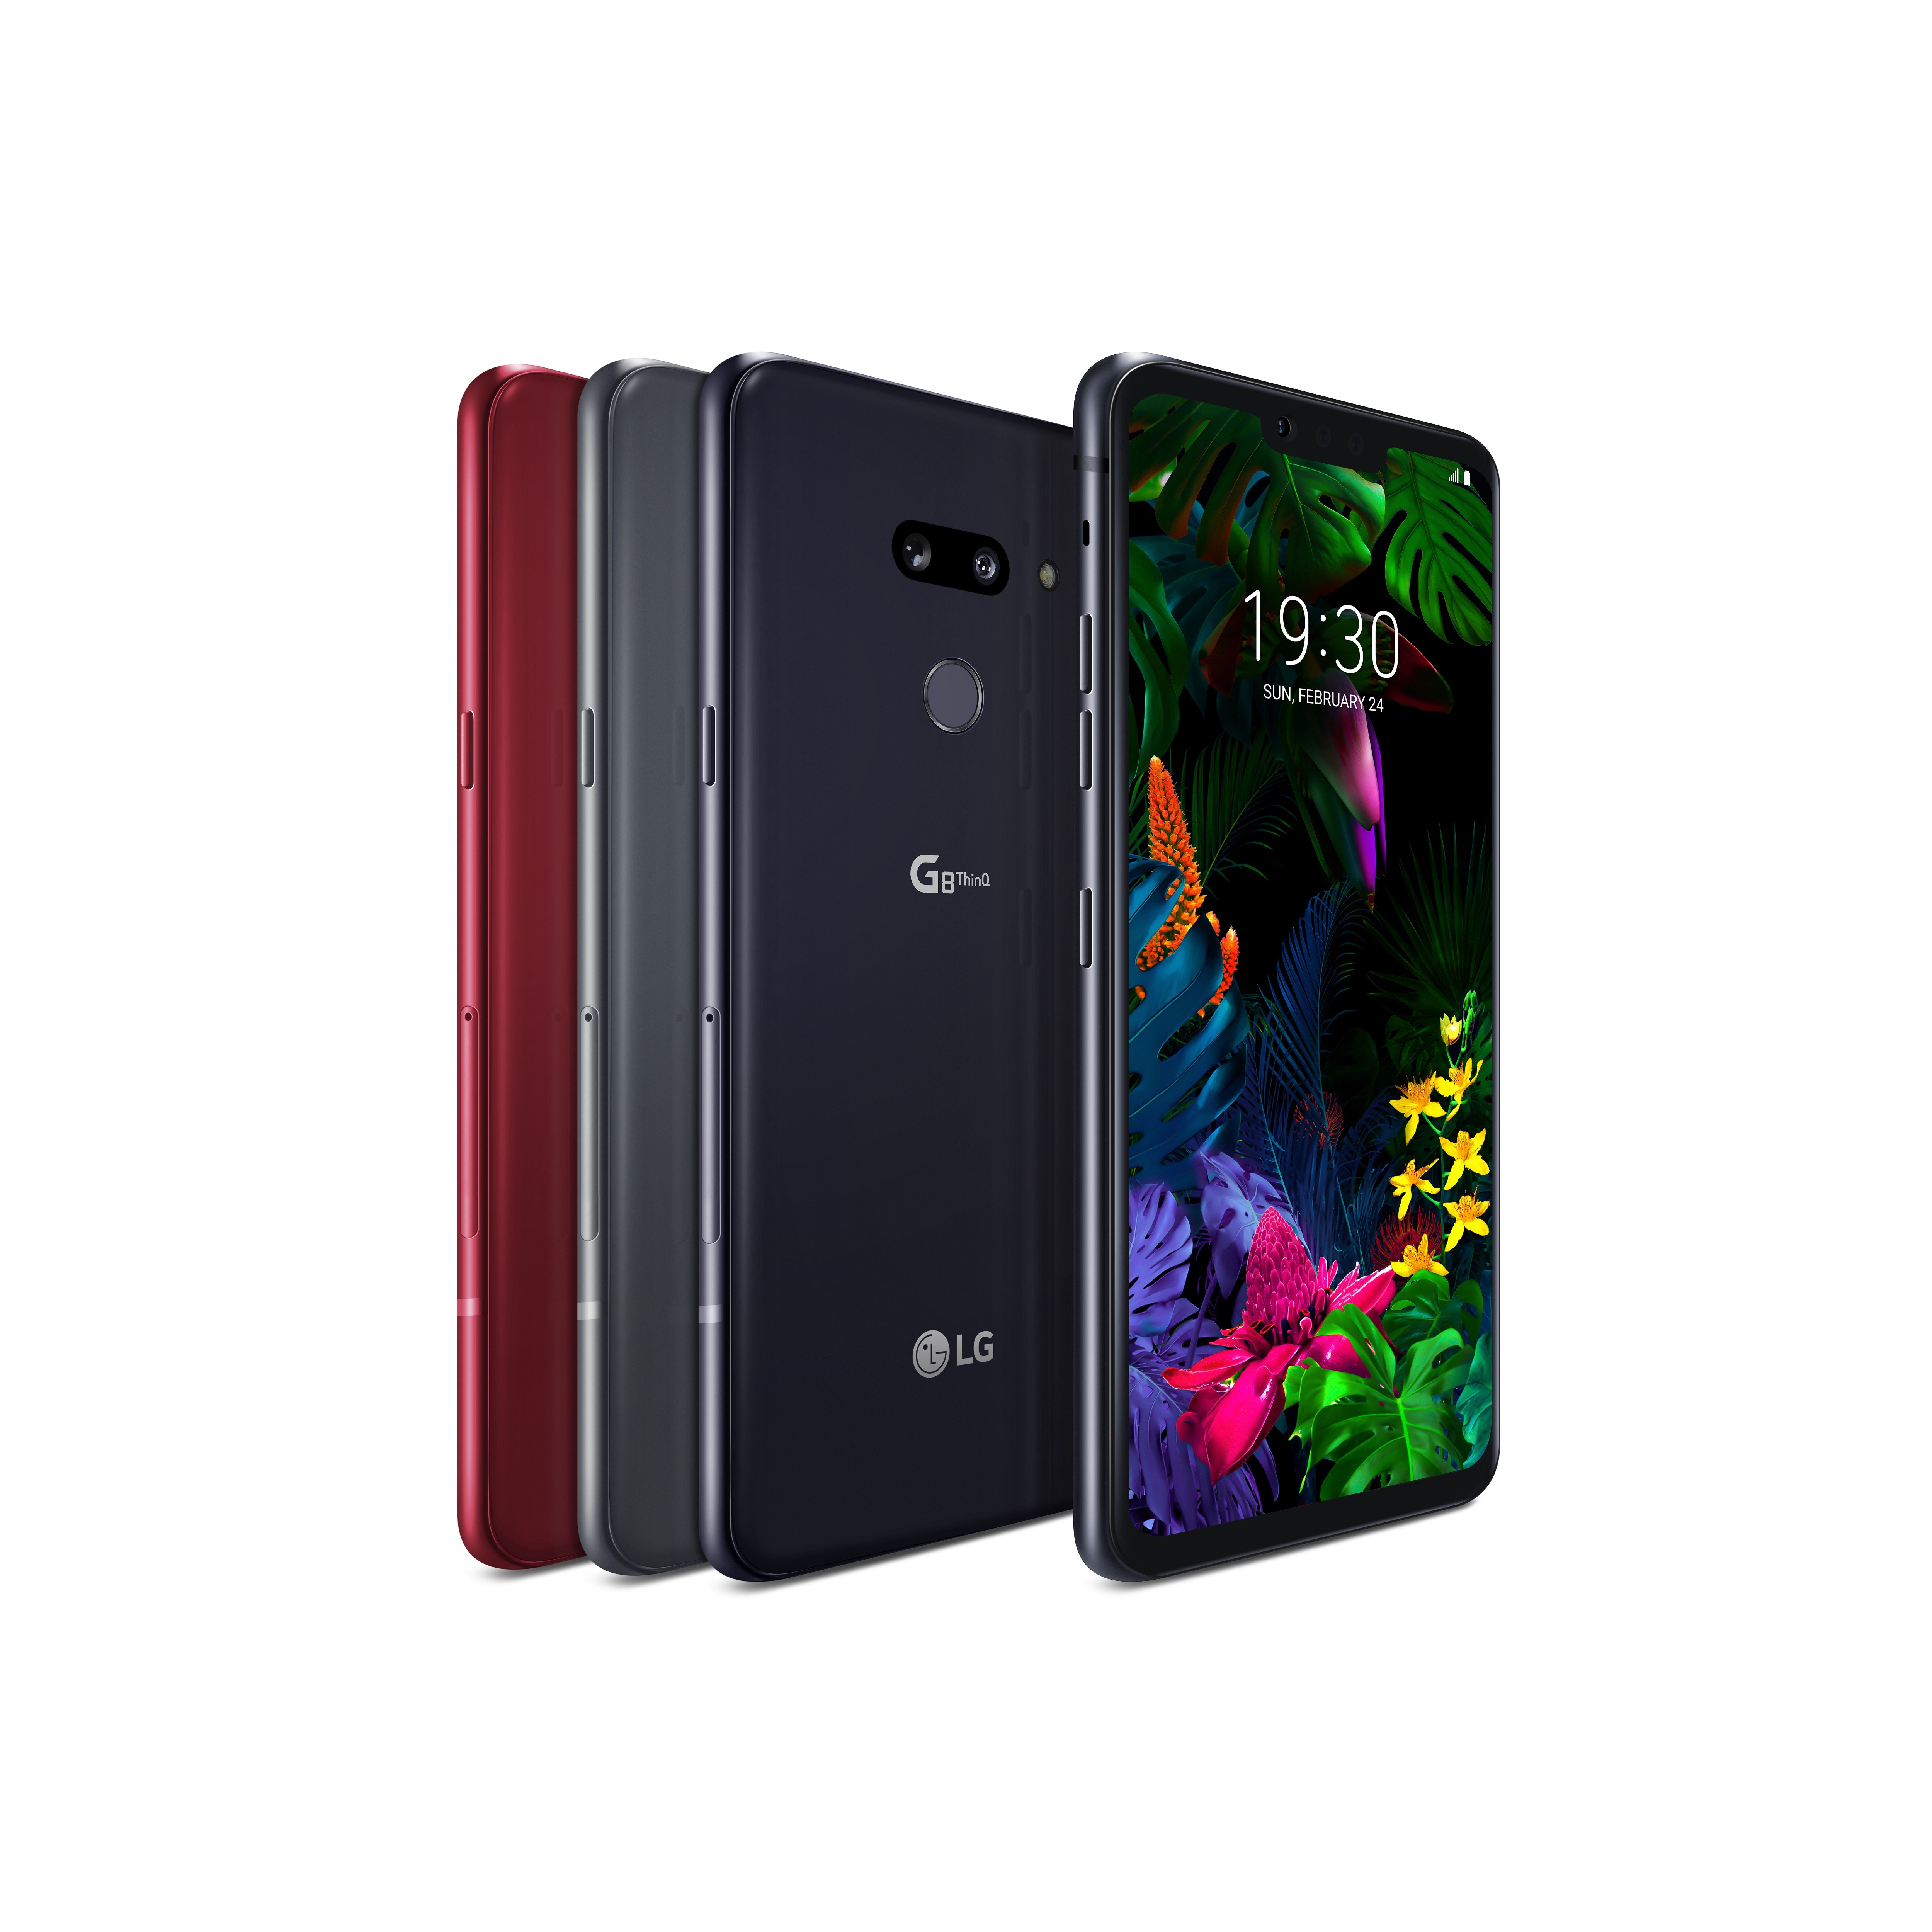 The front and rear view of the LG G8 ThinQ in Carmine Red, New Platinum Gray and New Aurora Black